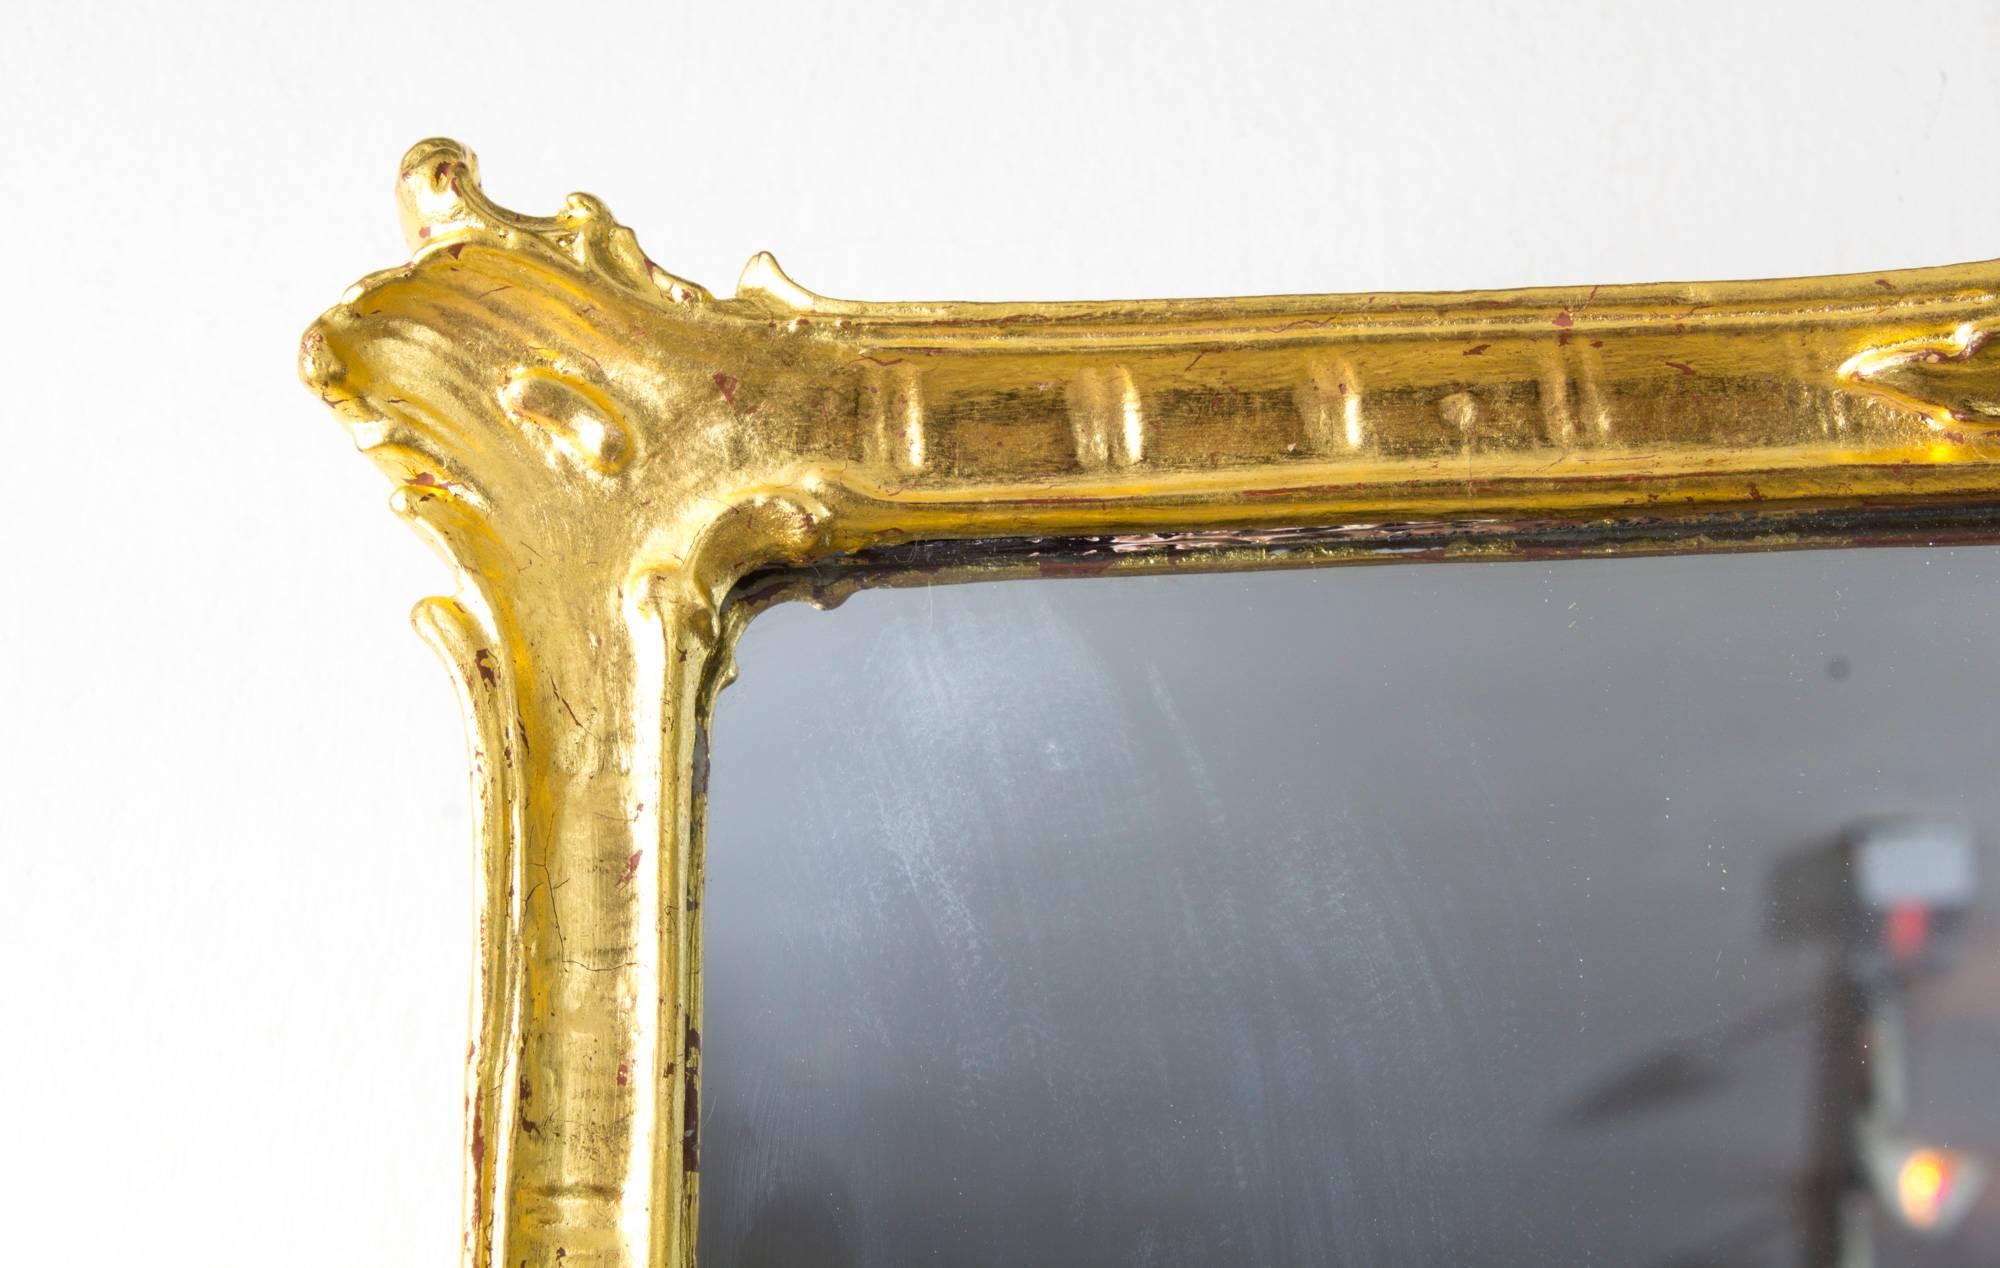 This is a beautiful antique Victorian giltwood mirror, circa 1860 in date.

Gushing with beauty, elegance and refinement, this mirror is the epitome of Victorian style. It is certain to make a charming addition to that one special room in your